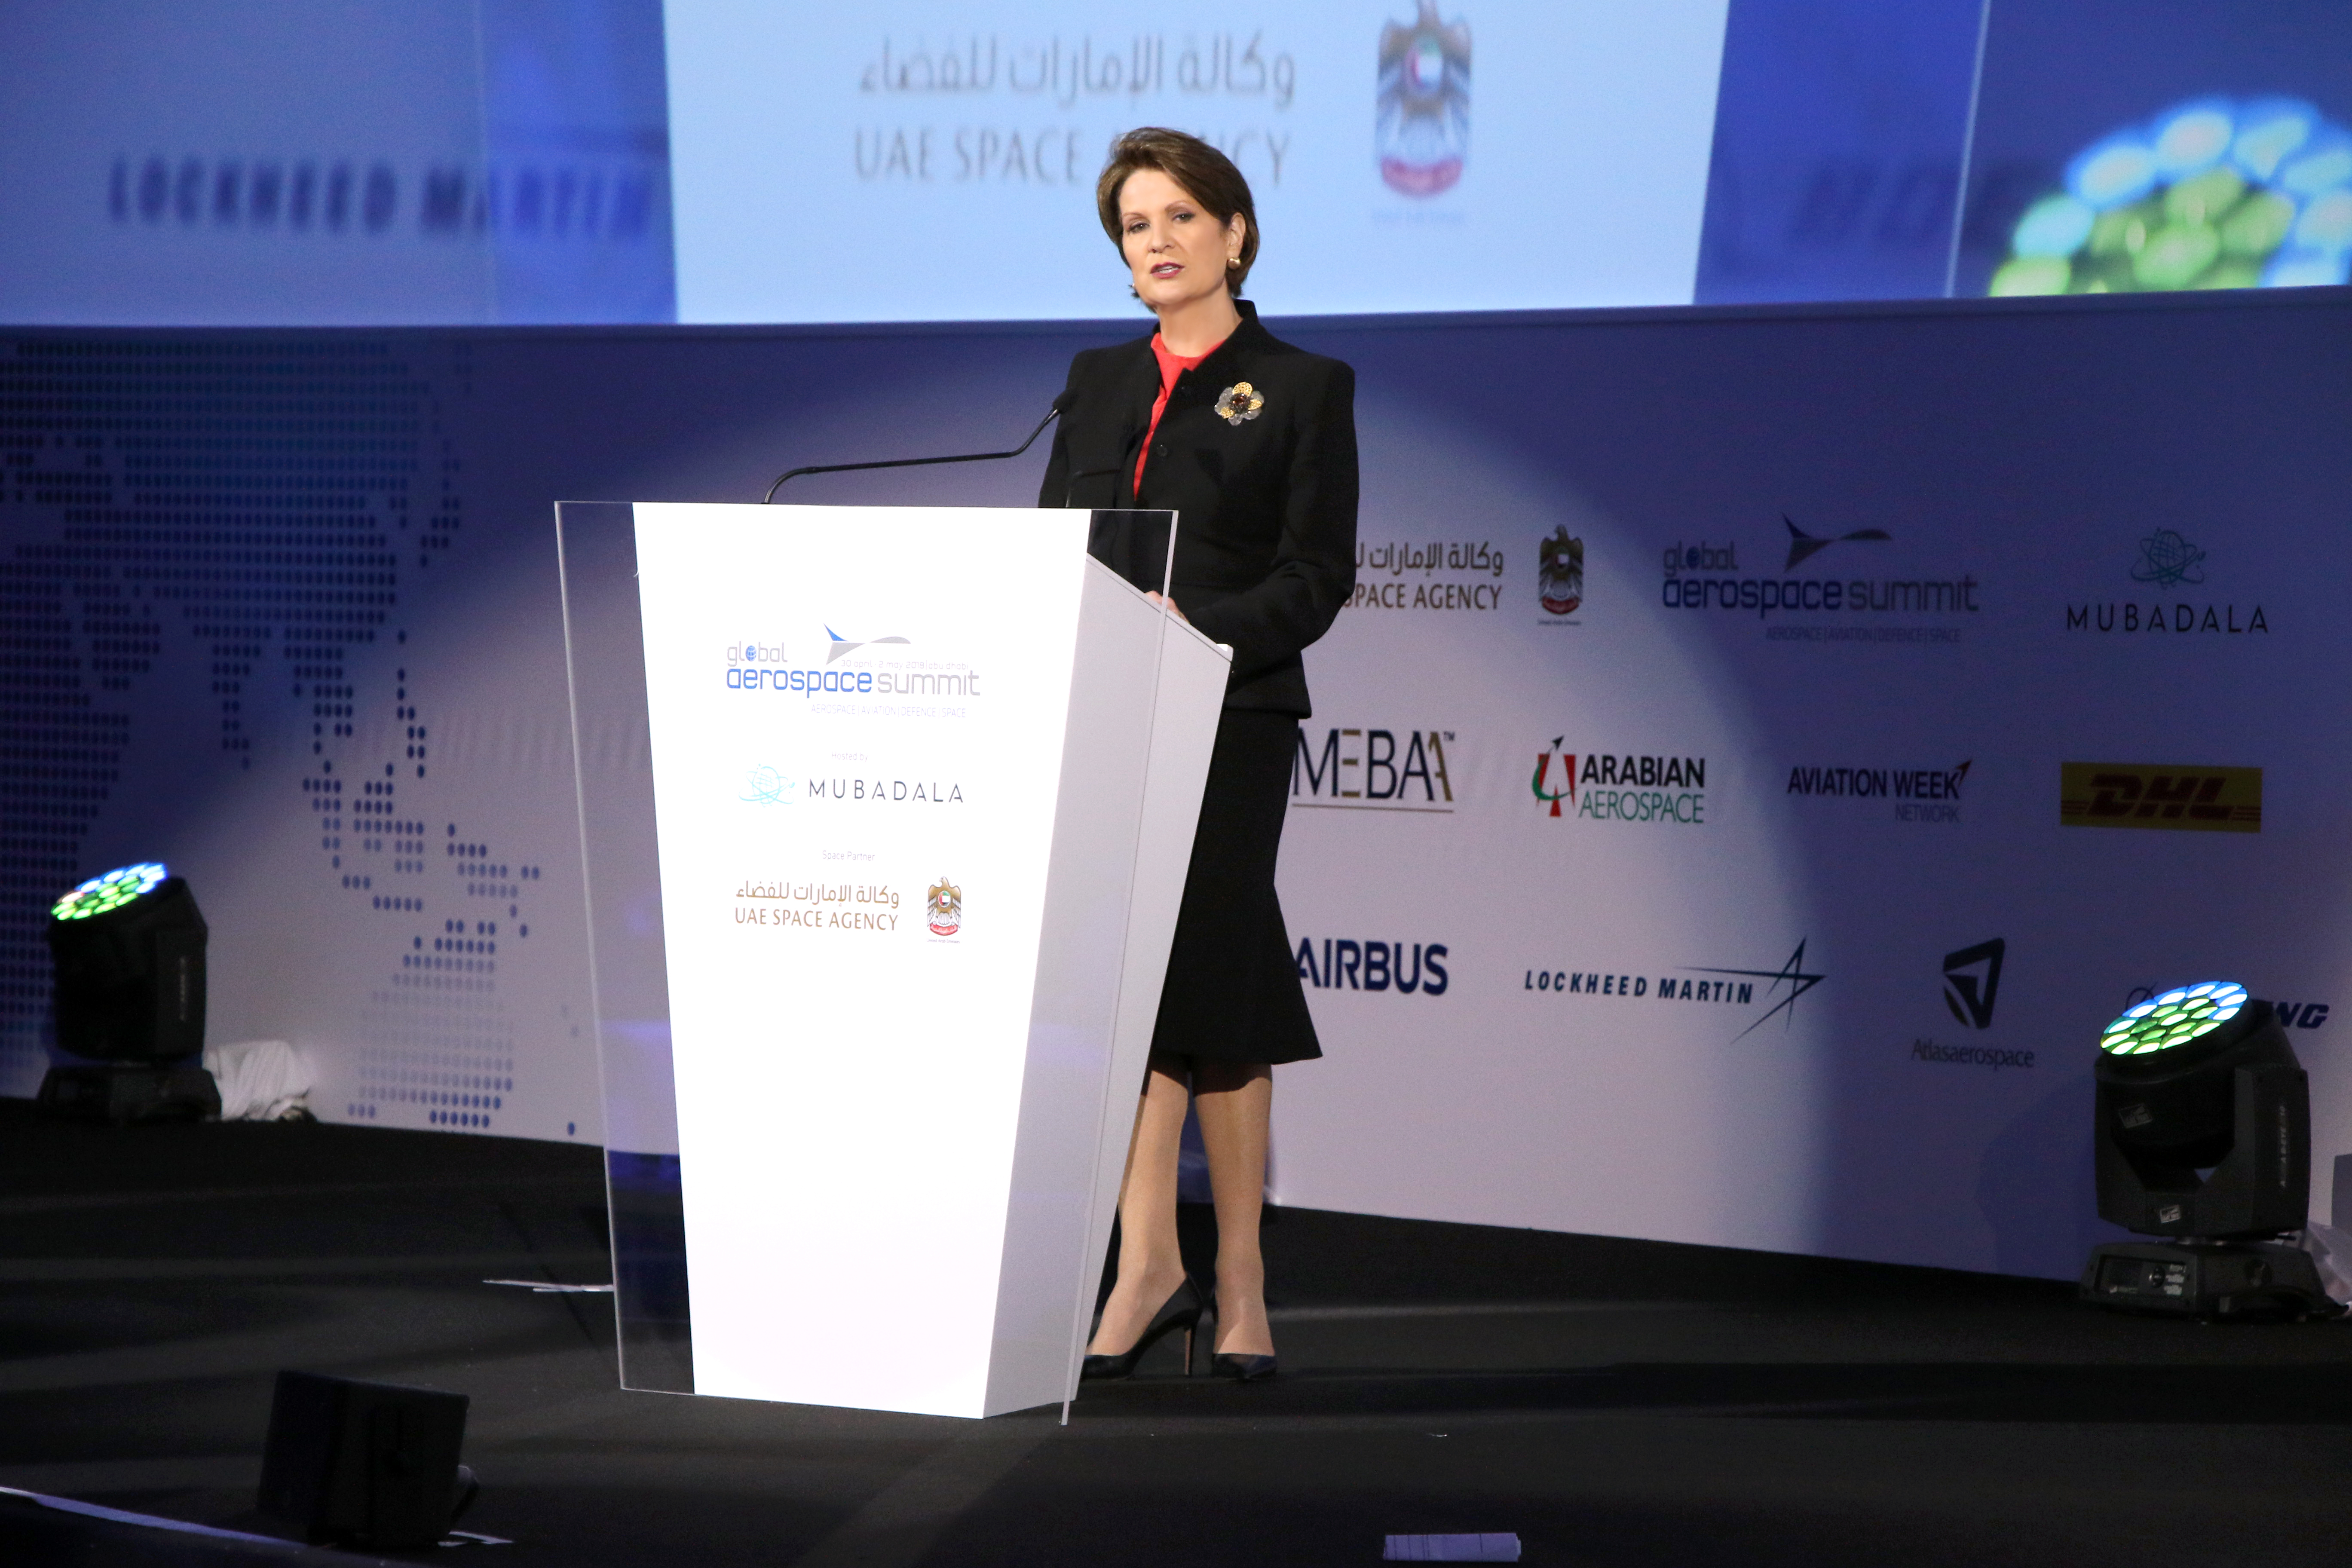 Marillyn Hewson, Lockheed Martin Chairman, President and CEO Delivers Remarks at Global Aerospace Summit in Abu Dhabi